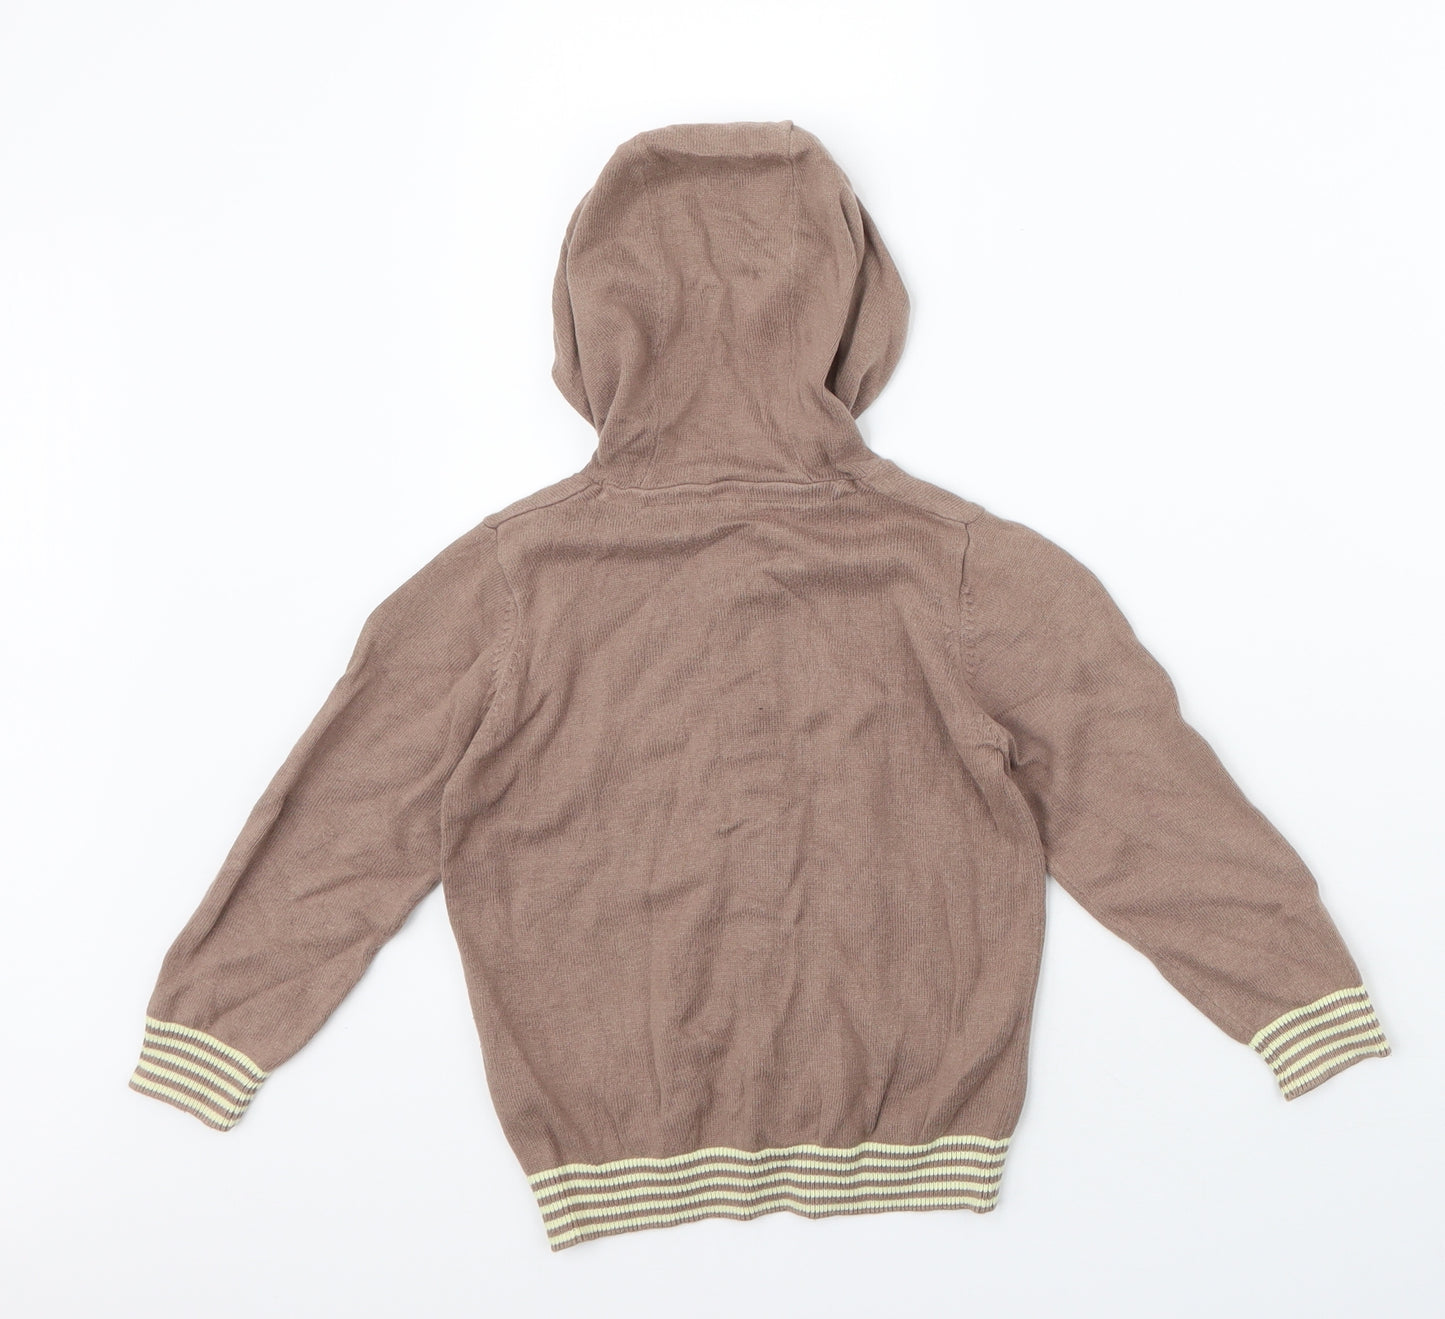 Marks and Spencer Boys Brown High Neck Striped 100% Cotton Cardigan Jumper Size 3-4 Years  Button